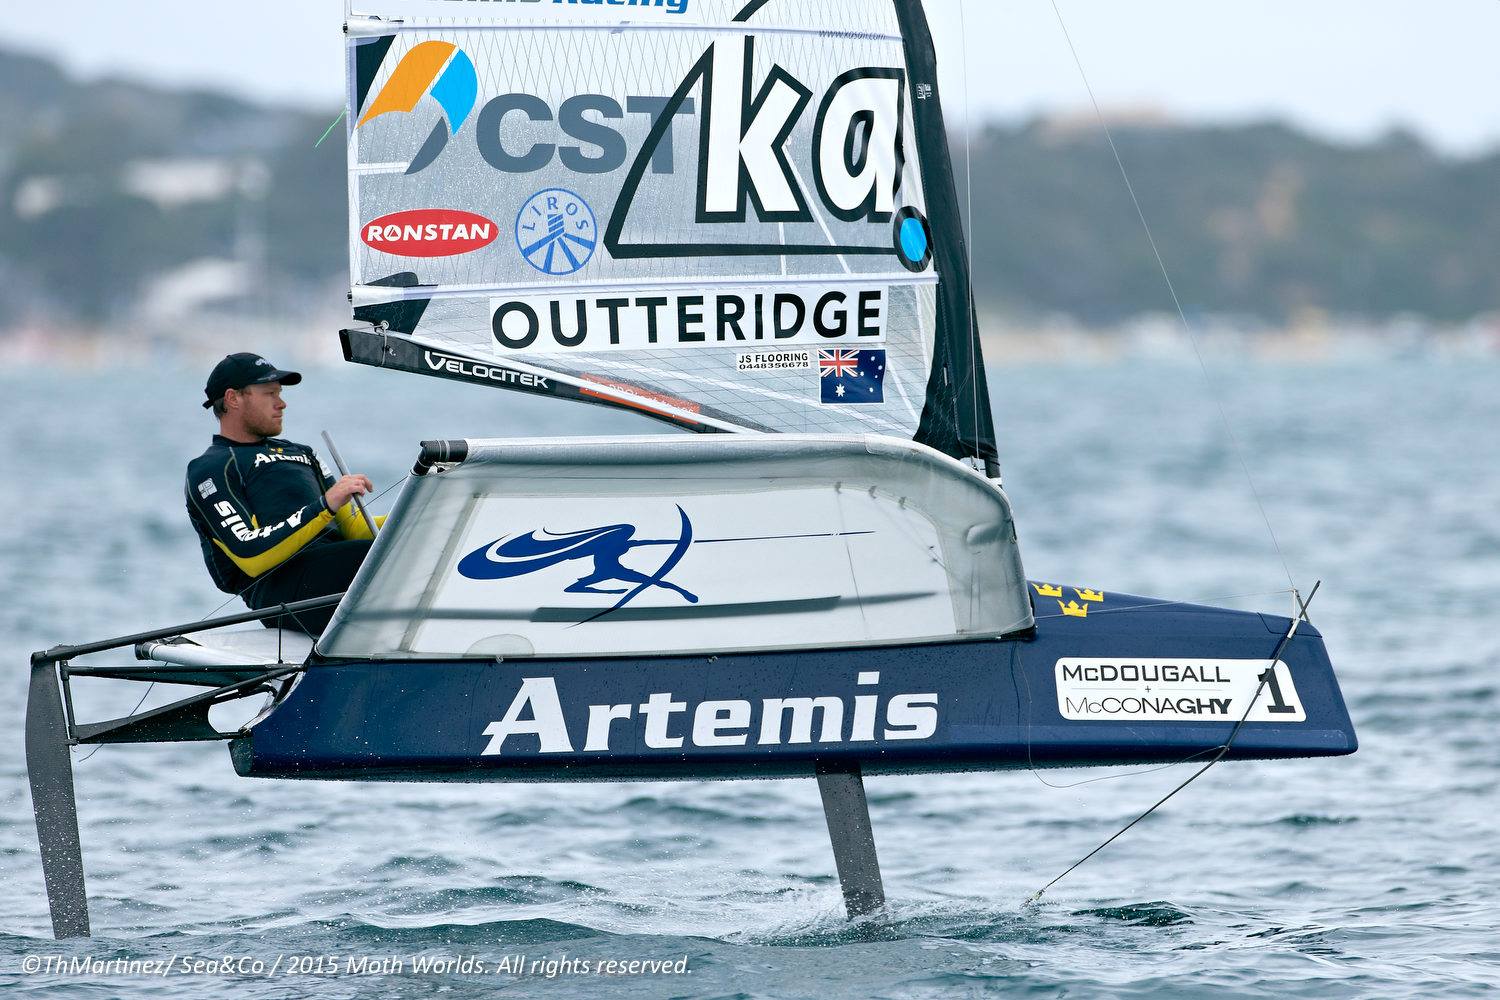 2015 moth worlds day1 results